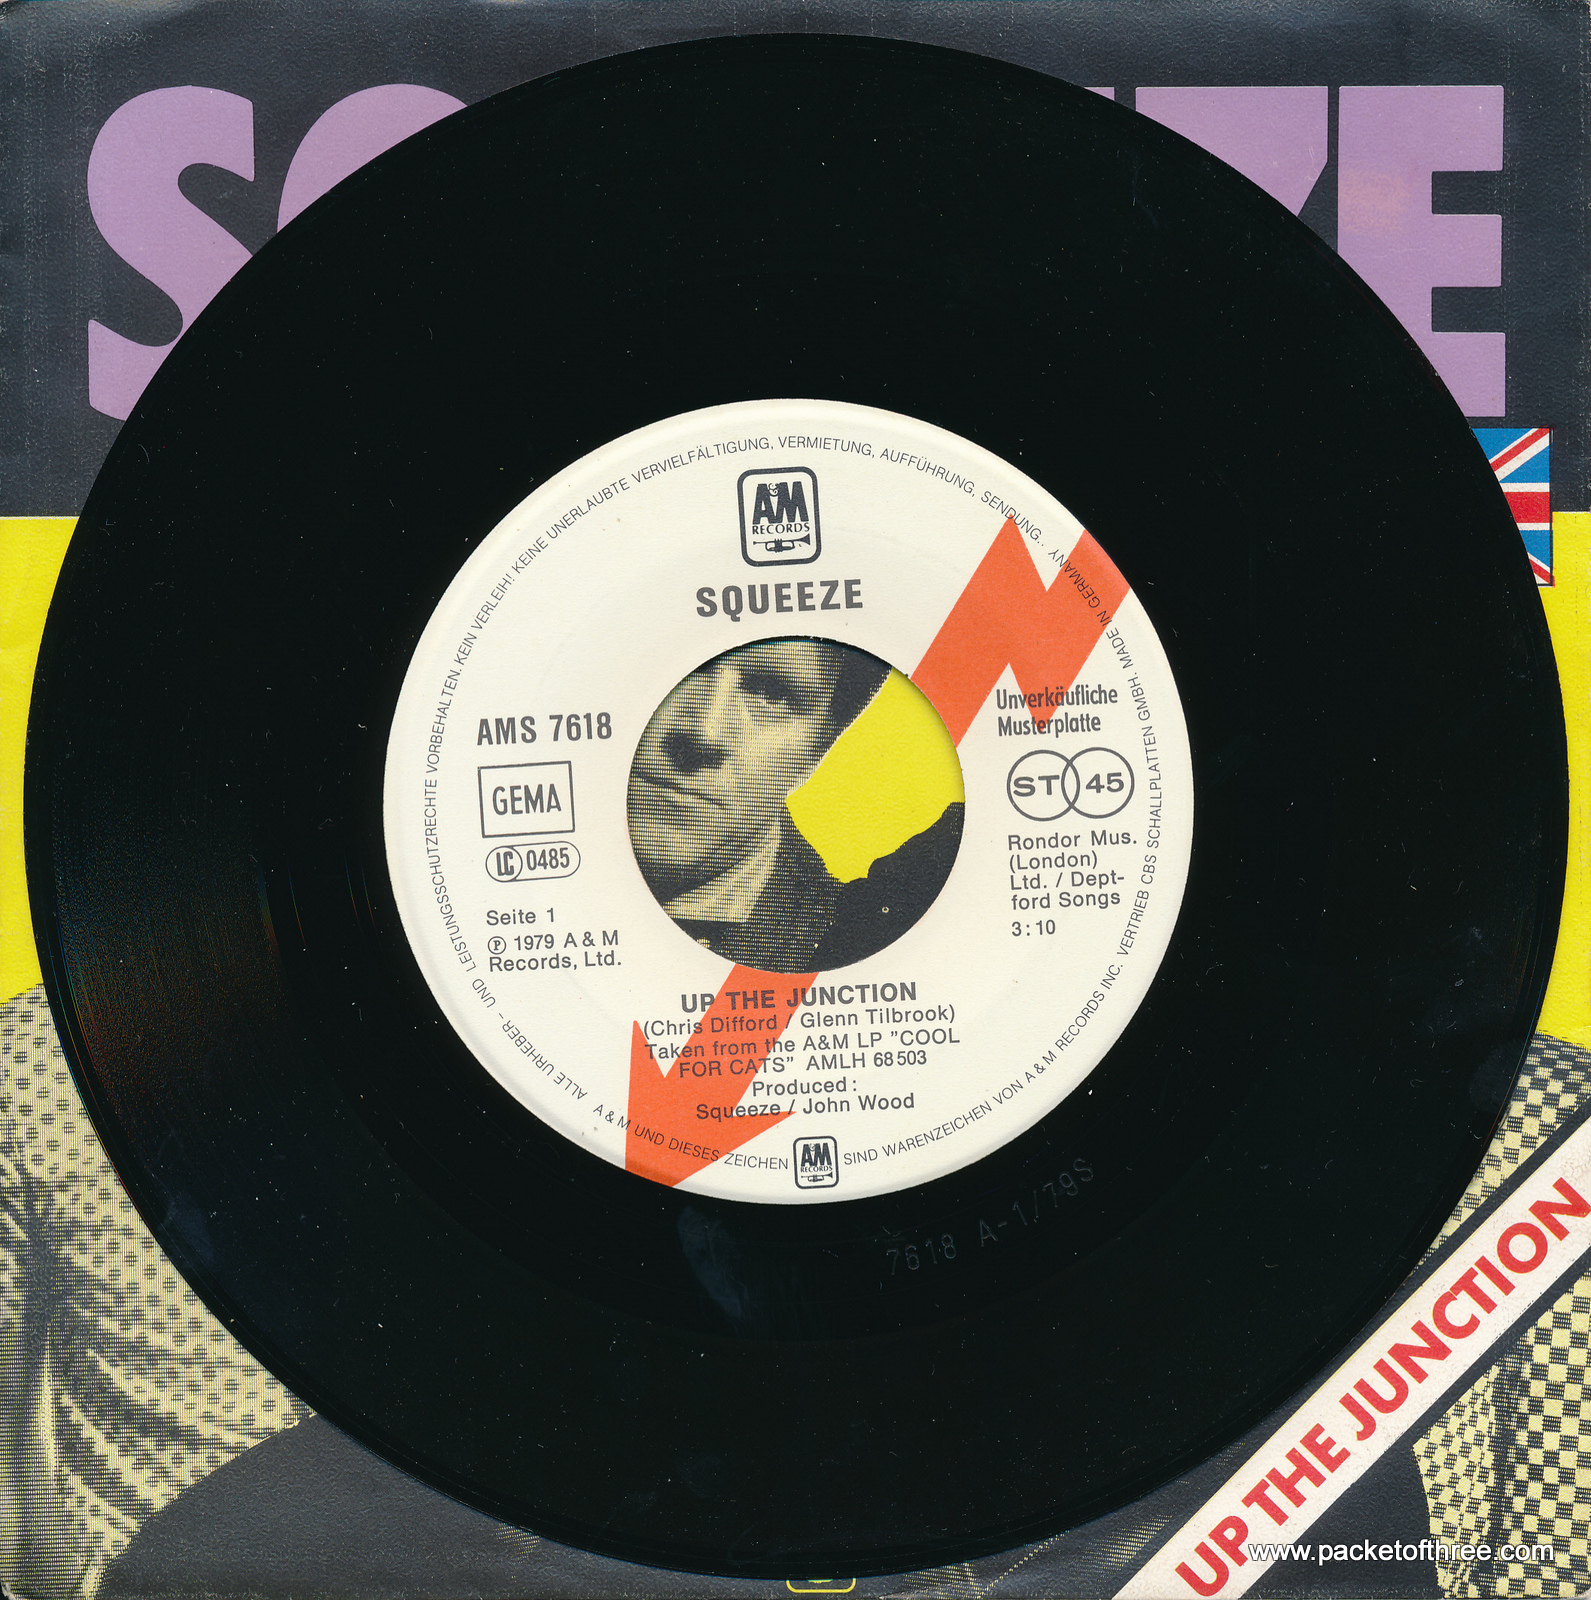 Up the Junction - Germany - 7" - picture sleeve promo